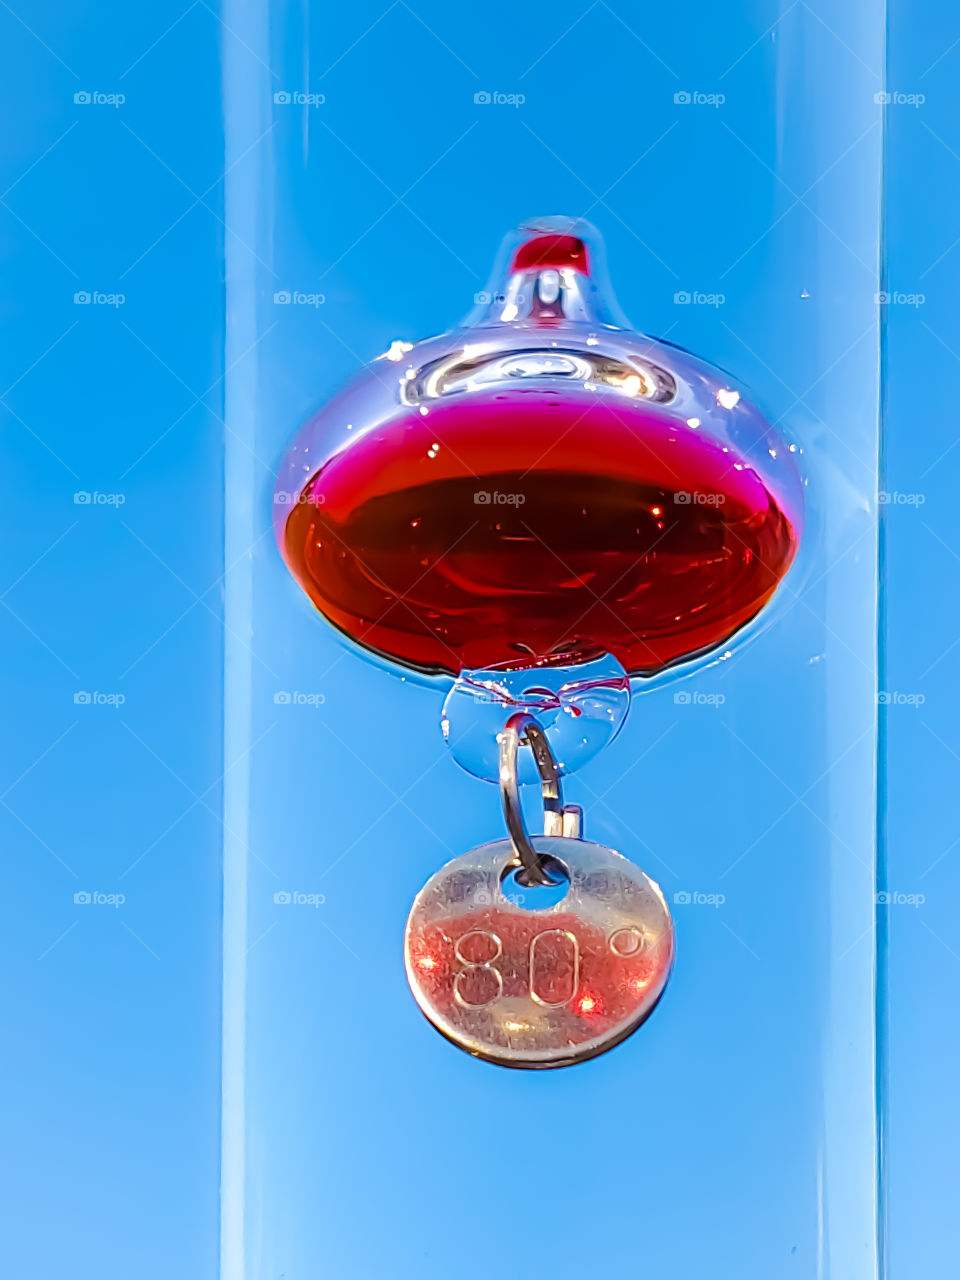 Eighty degree weather according to the Galileo thermometer with a clear blue sky in the background.